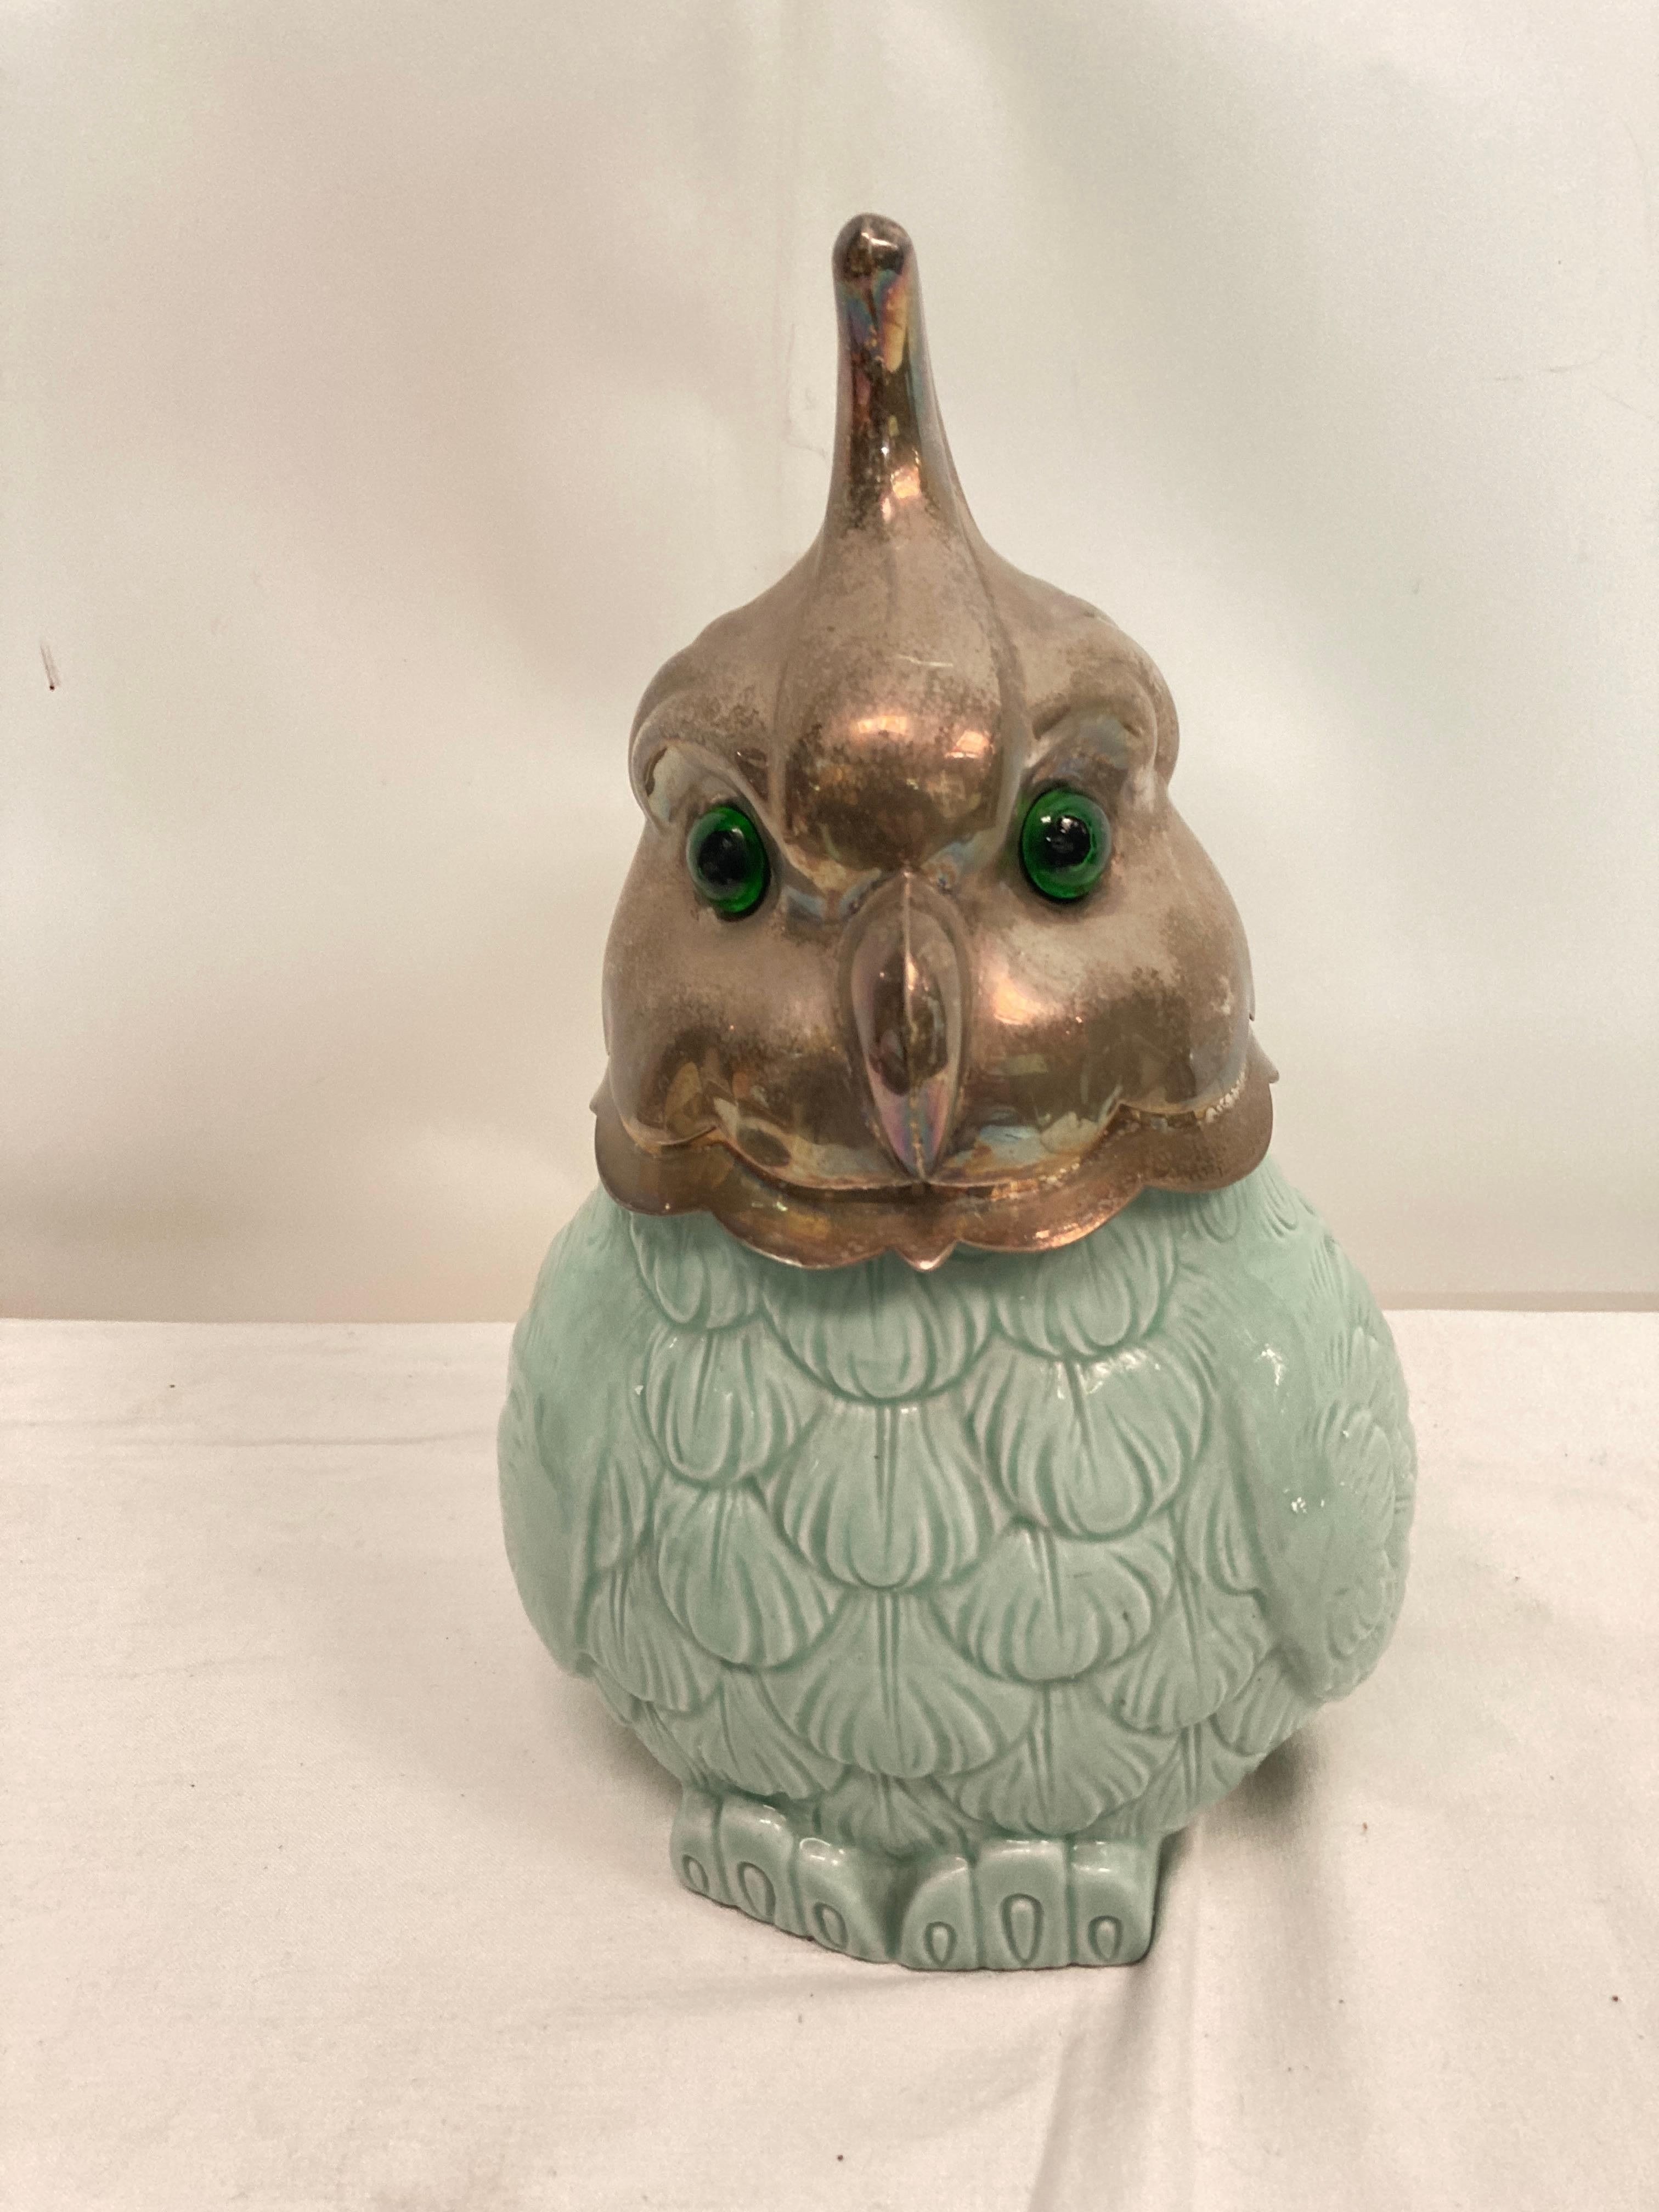 Very nice pot forming a charming parrot 
Celadon porcelain, silver plated and glass eyes
1970's